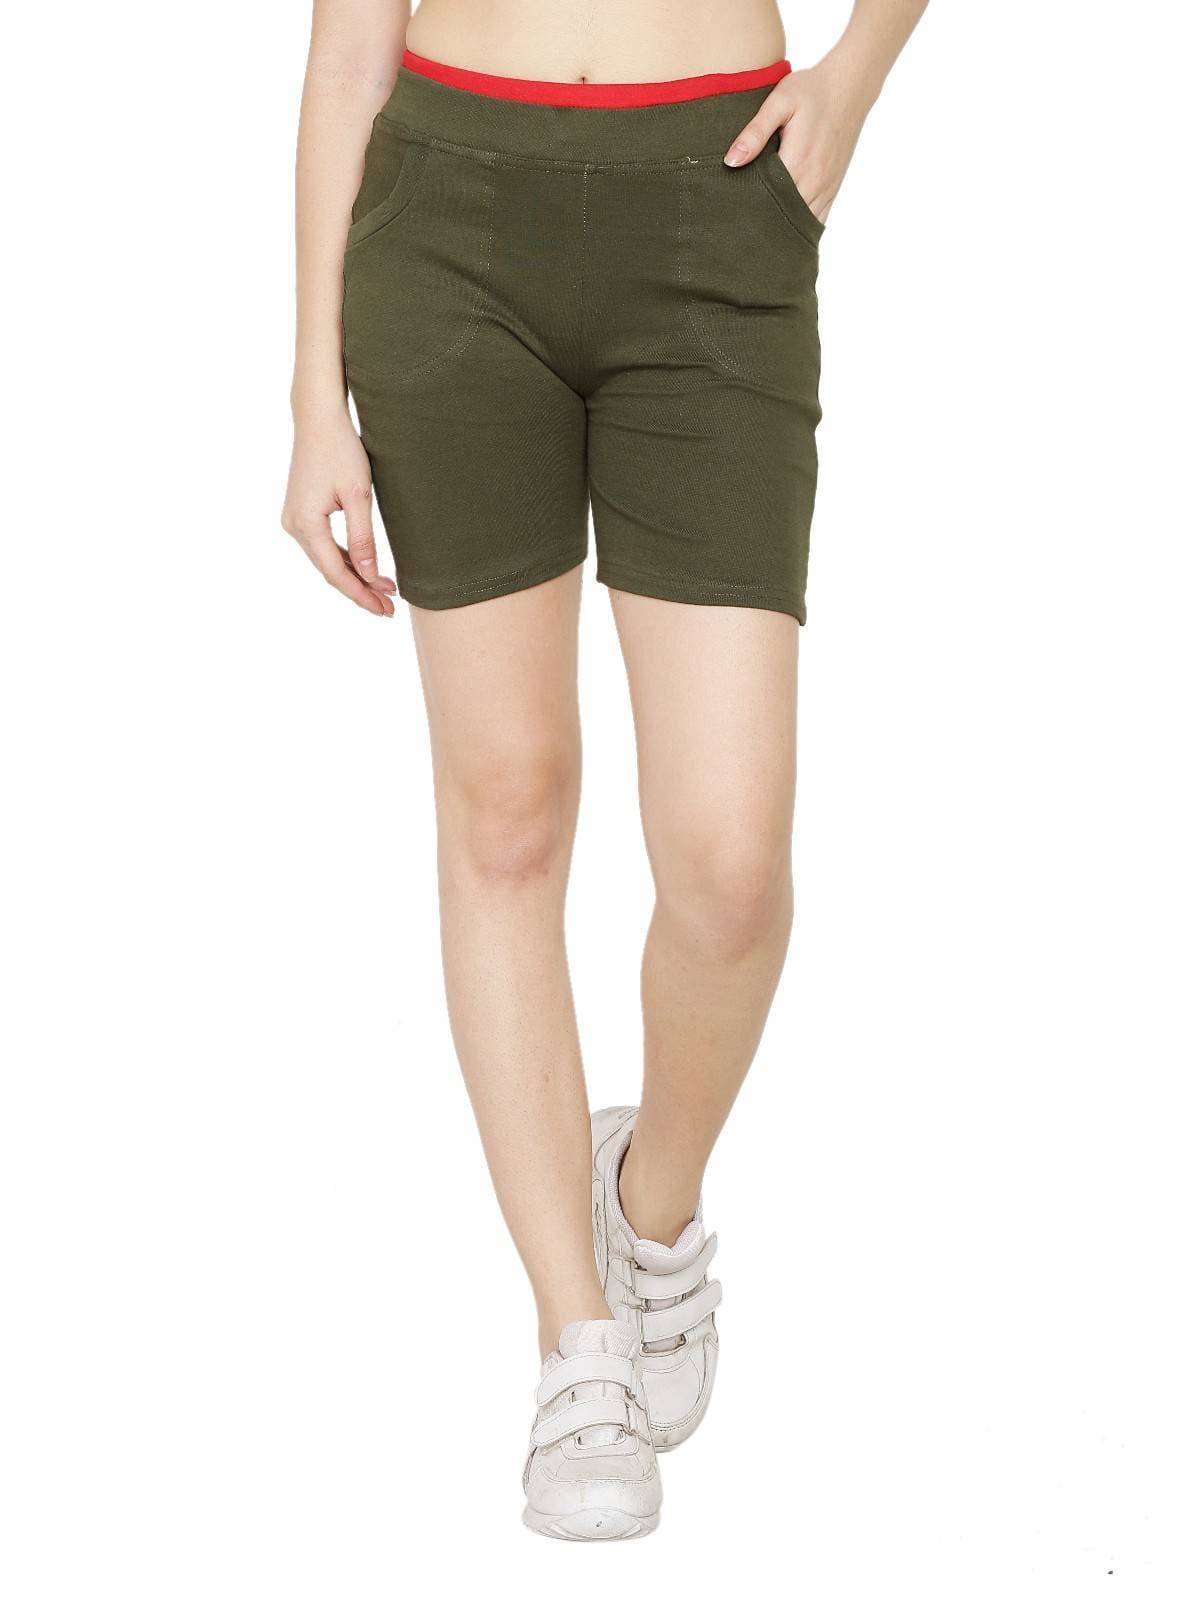 Asmaani Olive Green Color Short Pant with Two Side Pockets